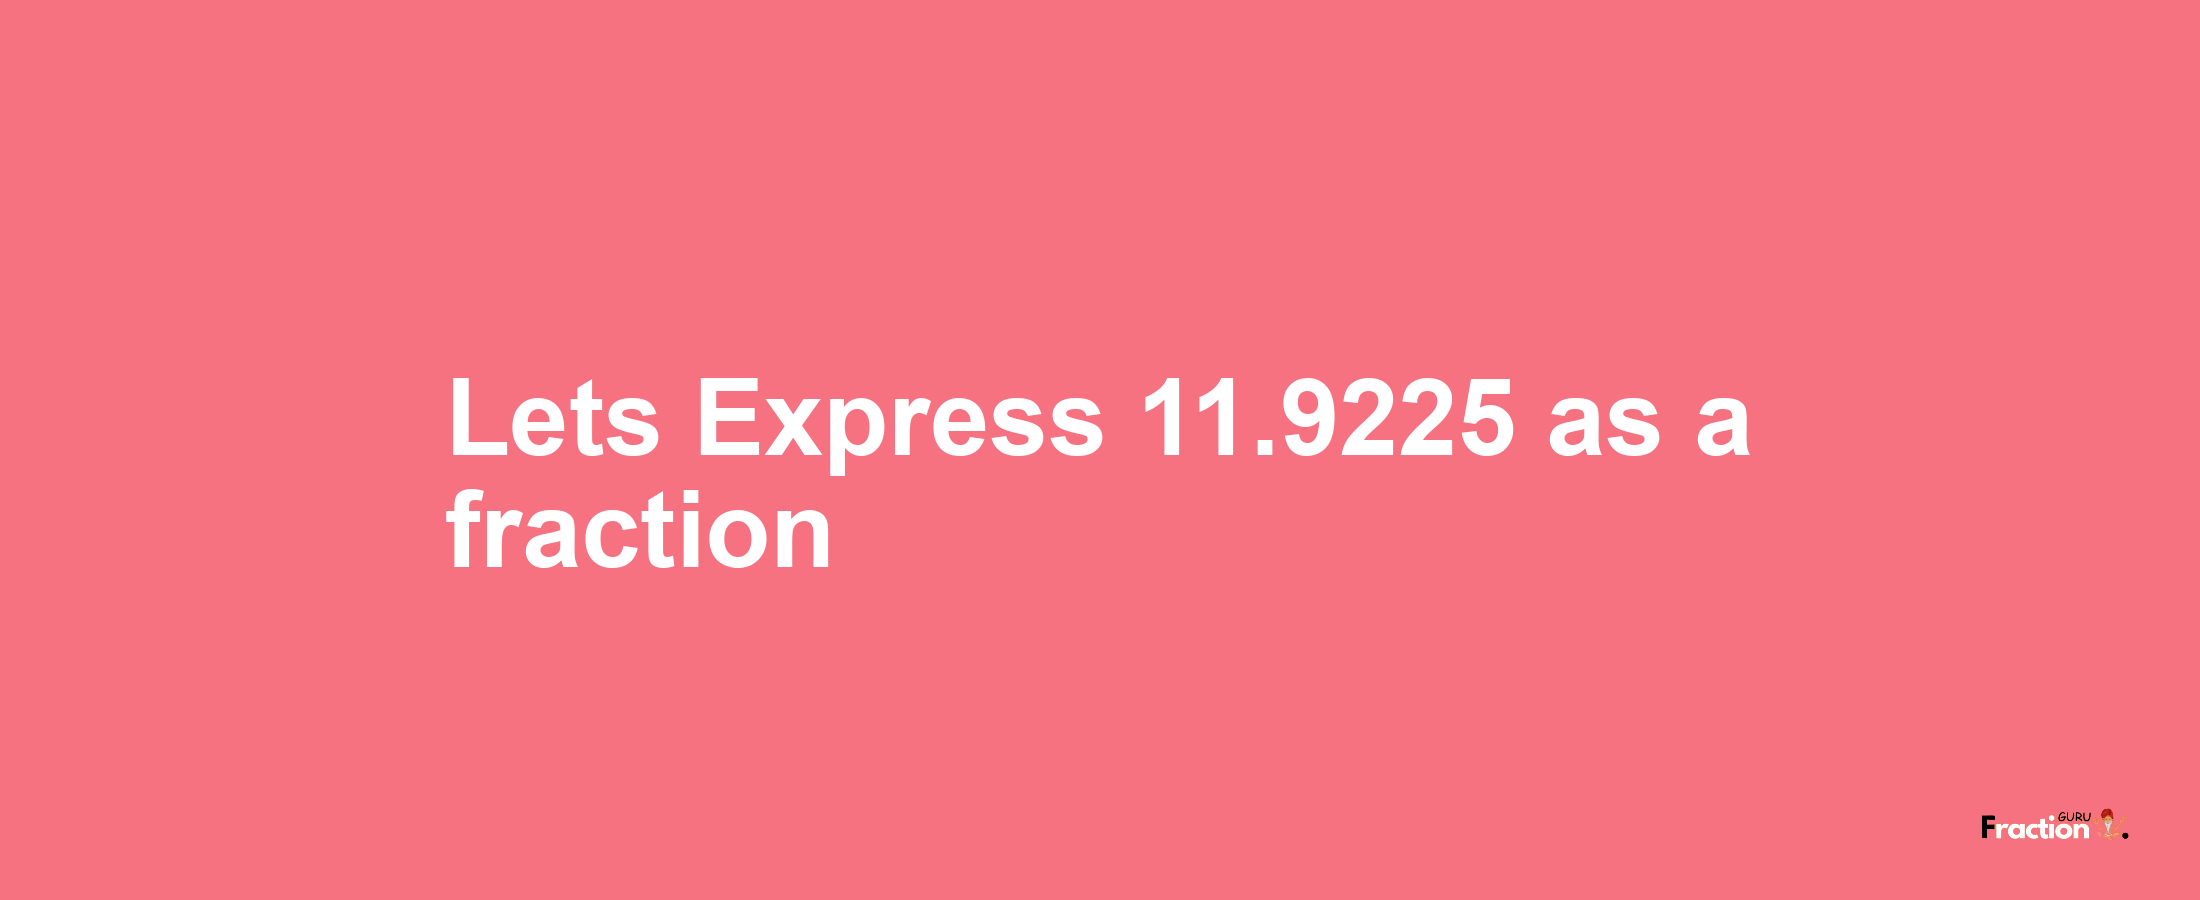 Lets Express 11.9225 as afraction